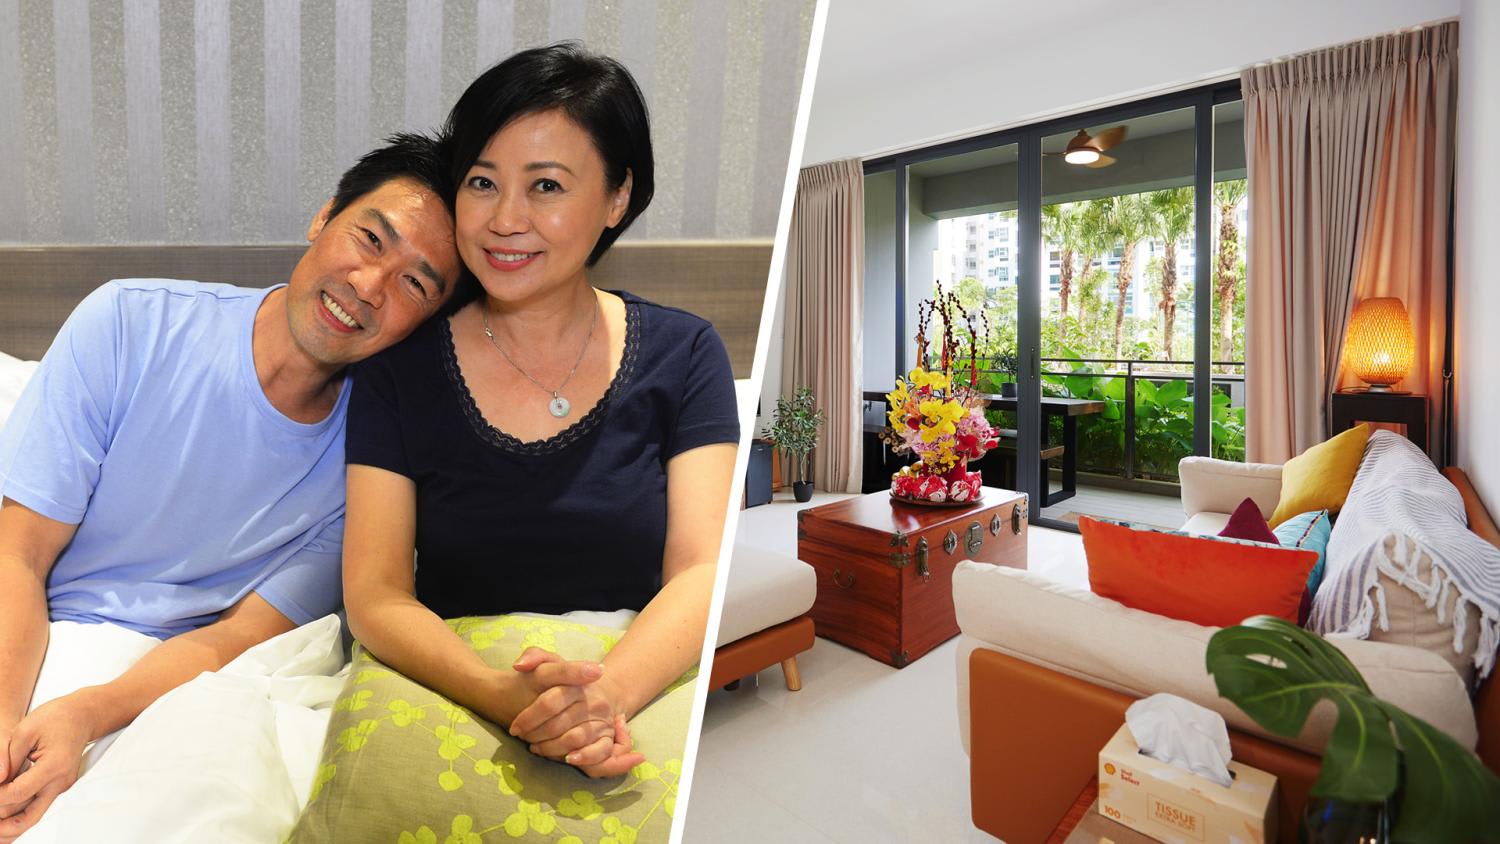 Edmund Chen & Xiang Yun’s $1Mil-Ground Floor “Staycation Home” Has Become An Attraction At Their Changi Condo